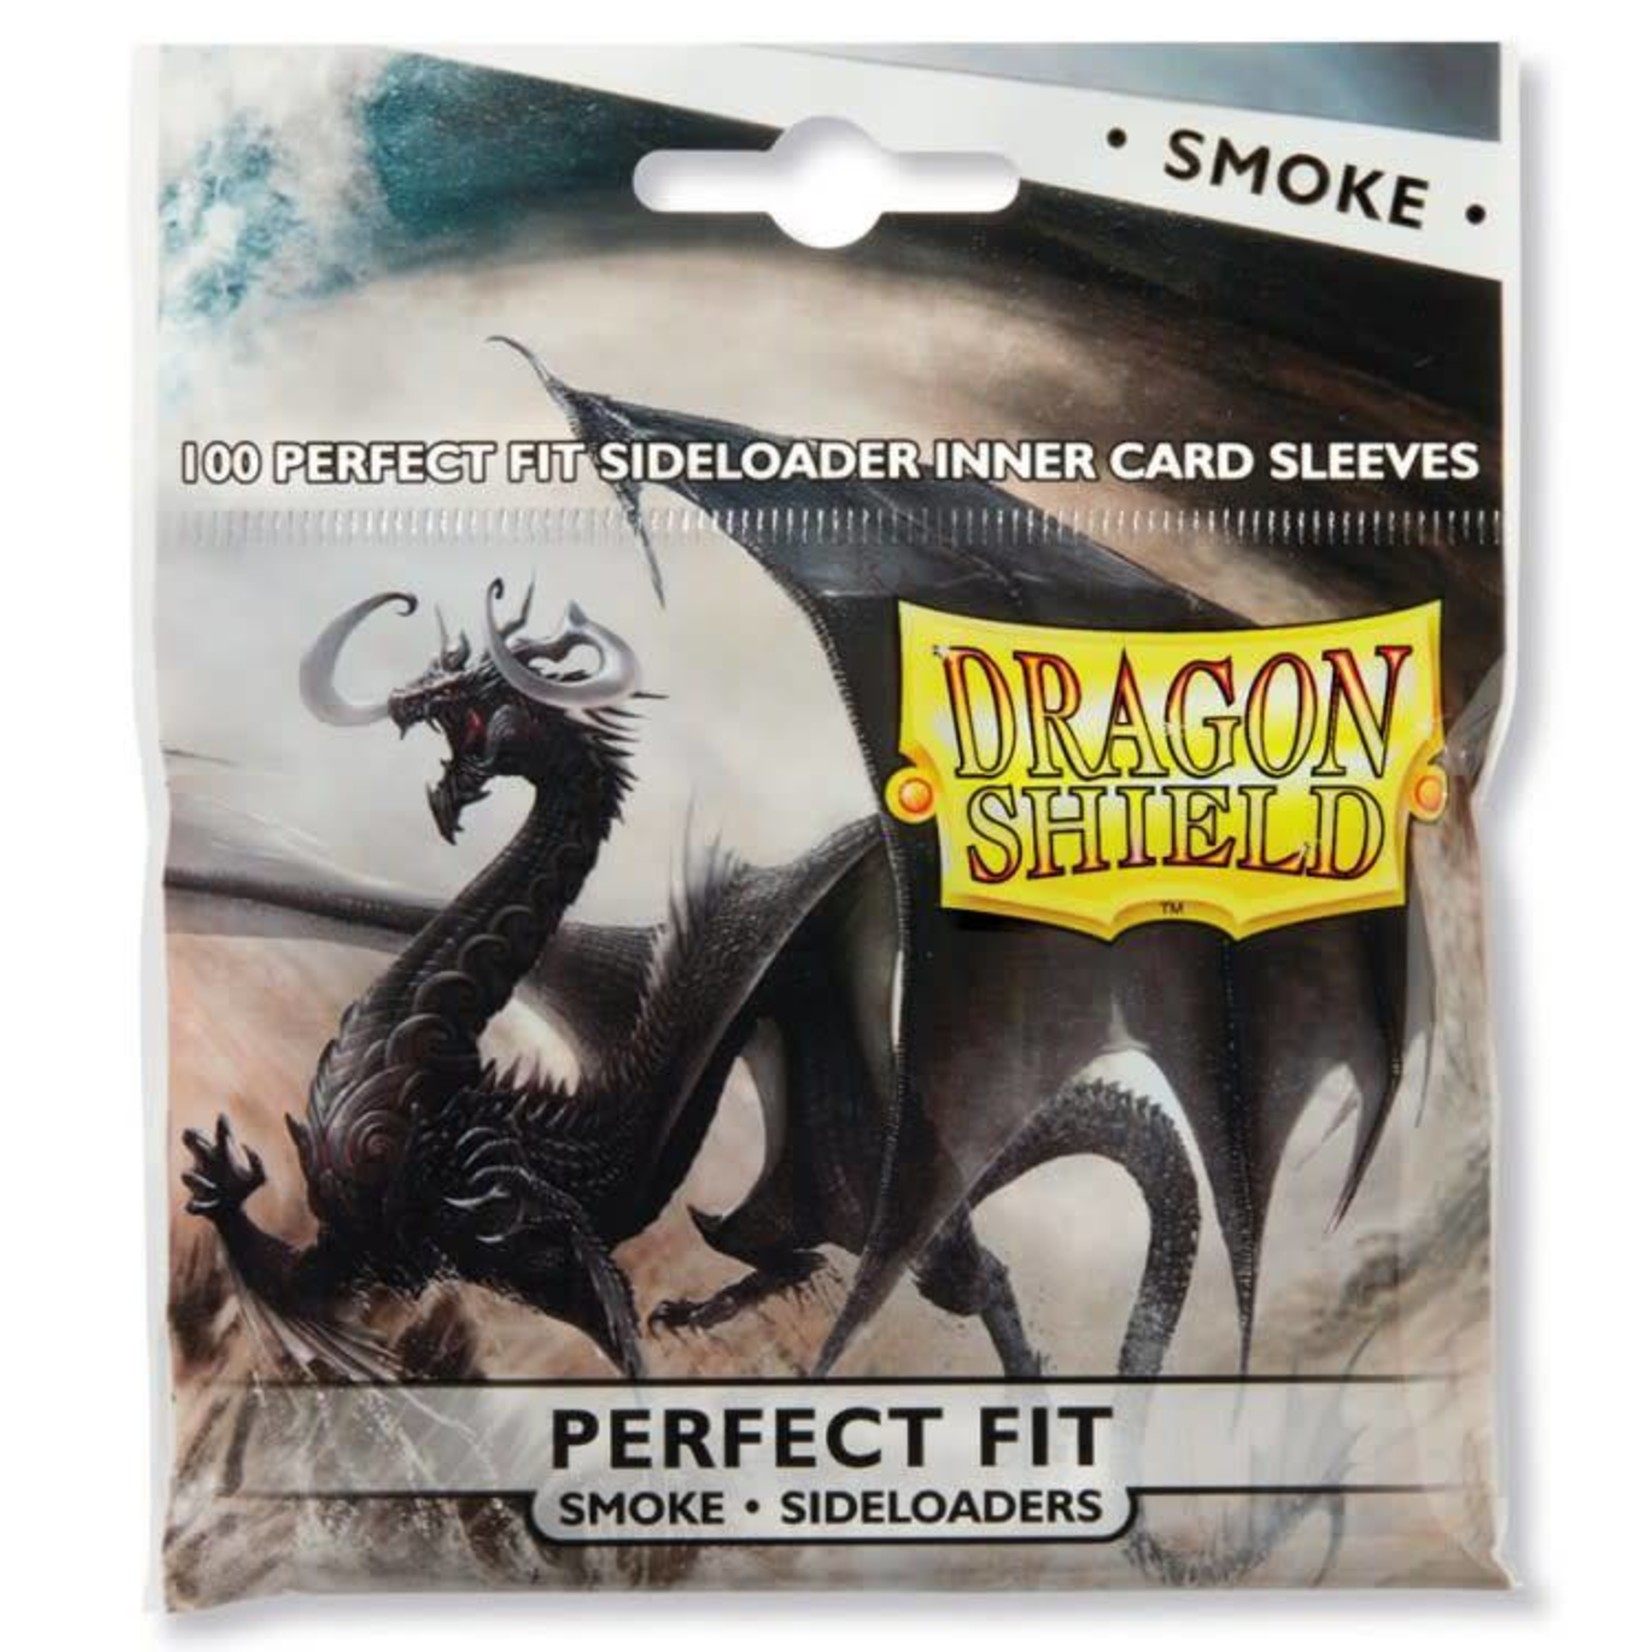 Arcane Tinman Dragon Shield: Perfect Fit Cards Sleeves - Side-load Smoke (100)